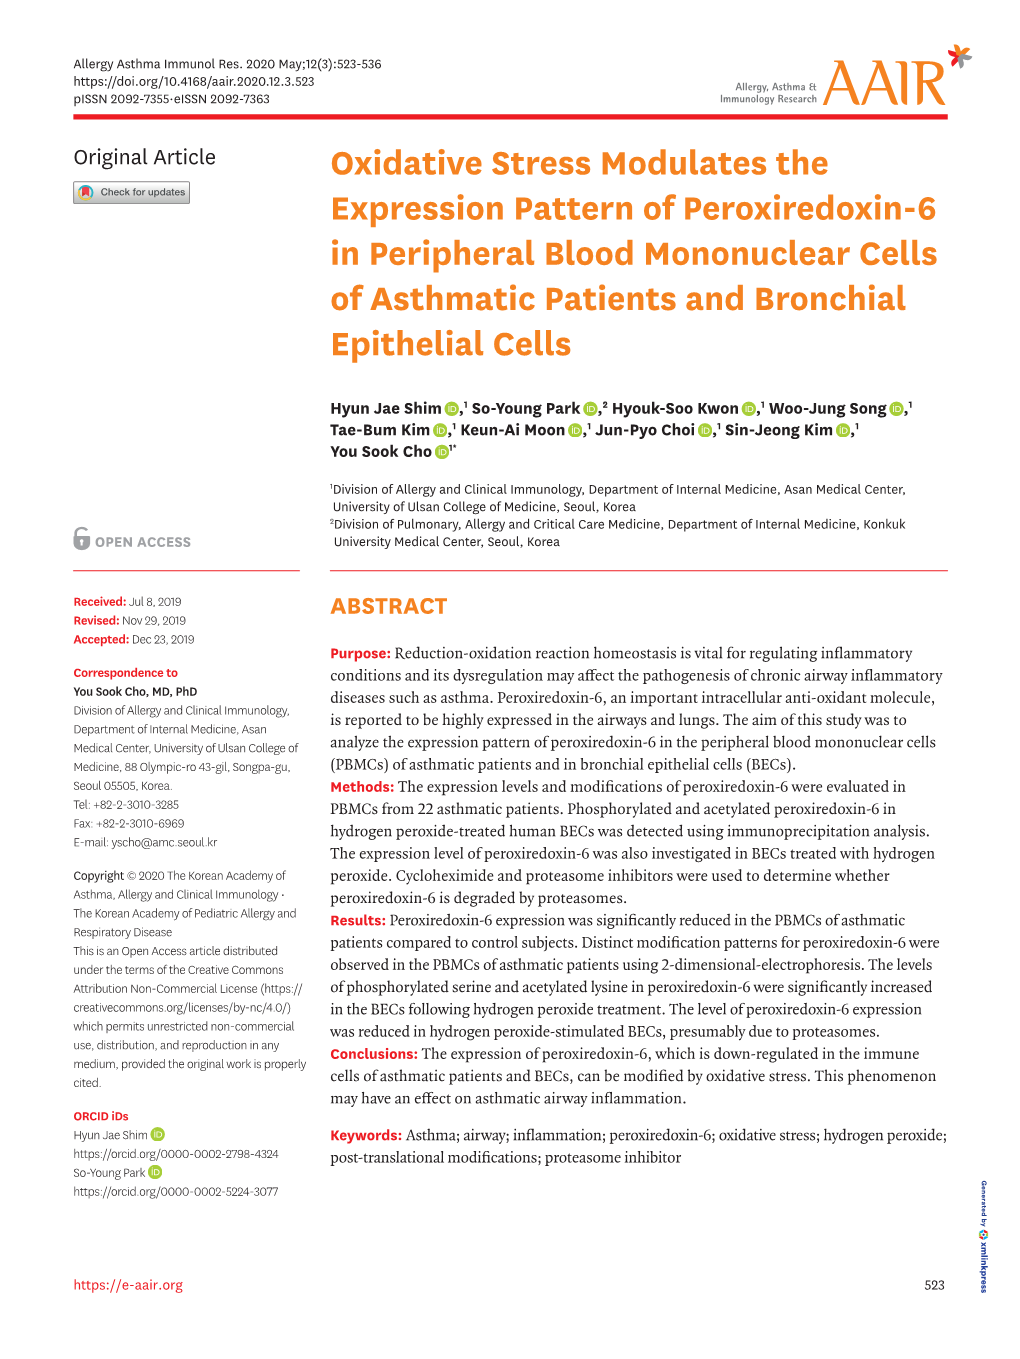 Oxidative Stress Modulates the Expression Pattern of Peroxiredoxin-6 in Peripheral Blood Mononuclear Cells of Asthmatic Patients and Bronchial Epithelial Cells